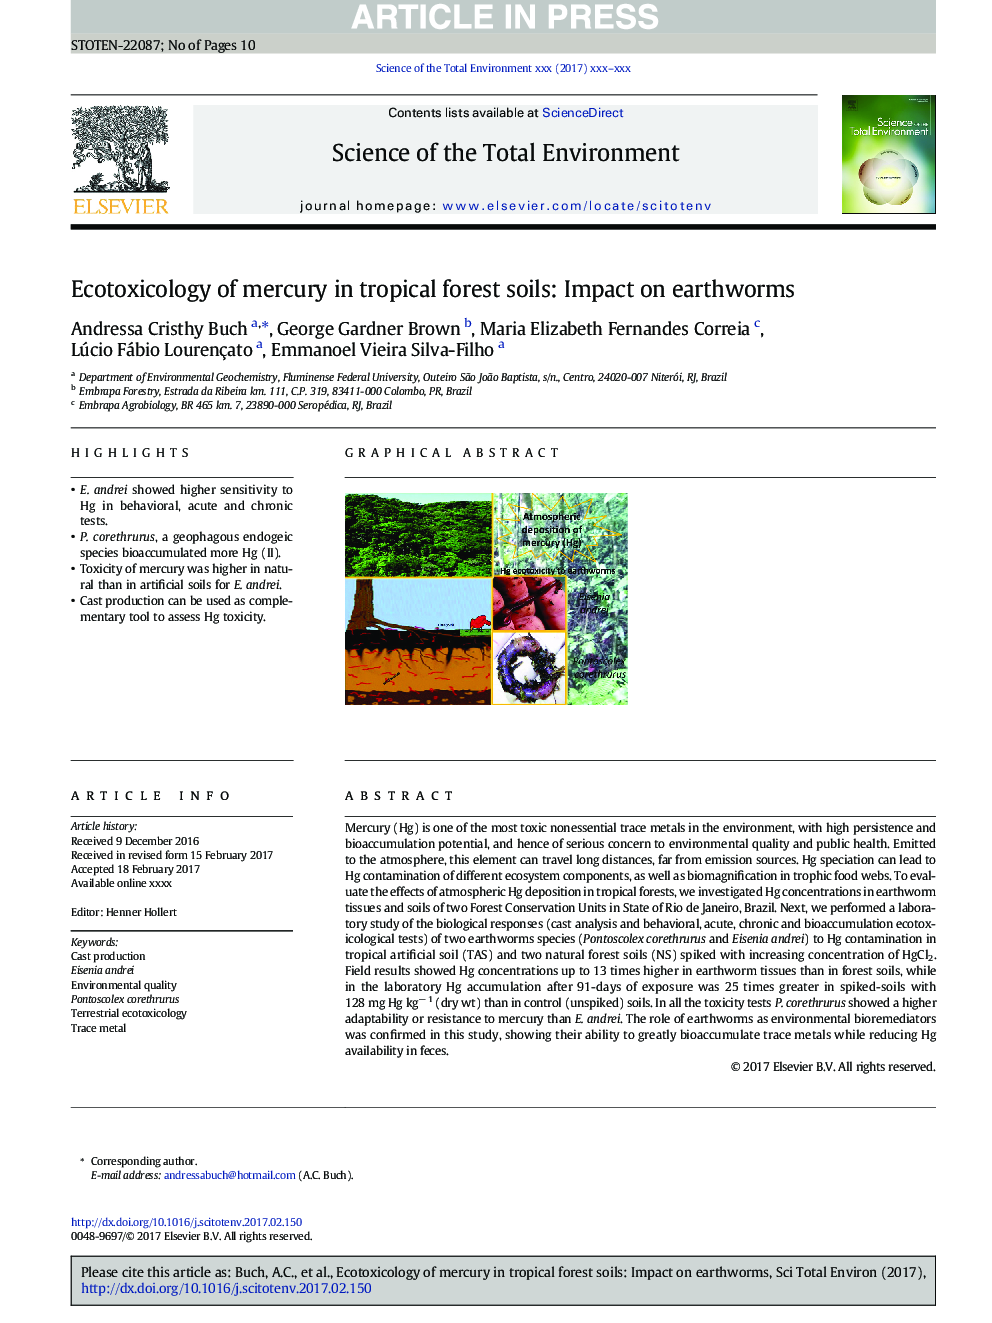 Ecotoxicology of mercury in tropical forest soils: Impact on earthworms